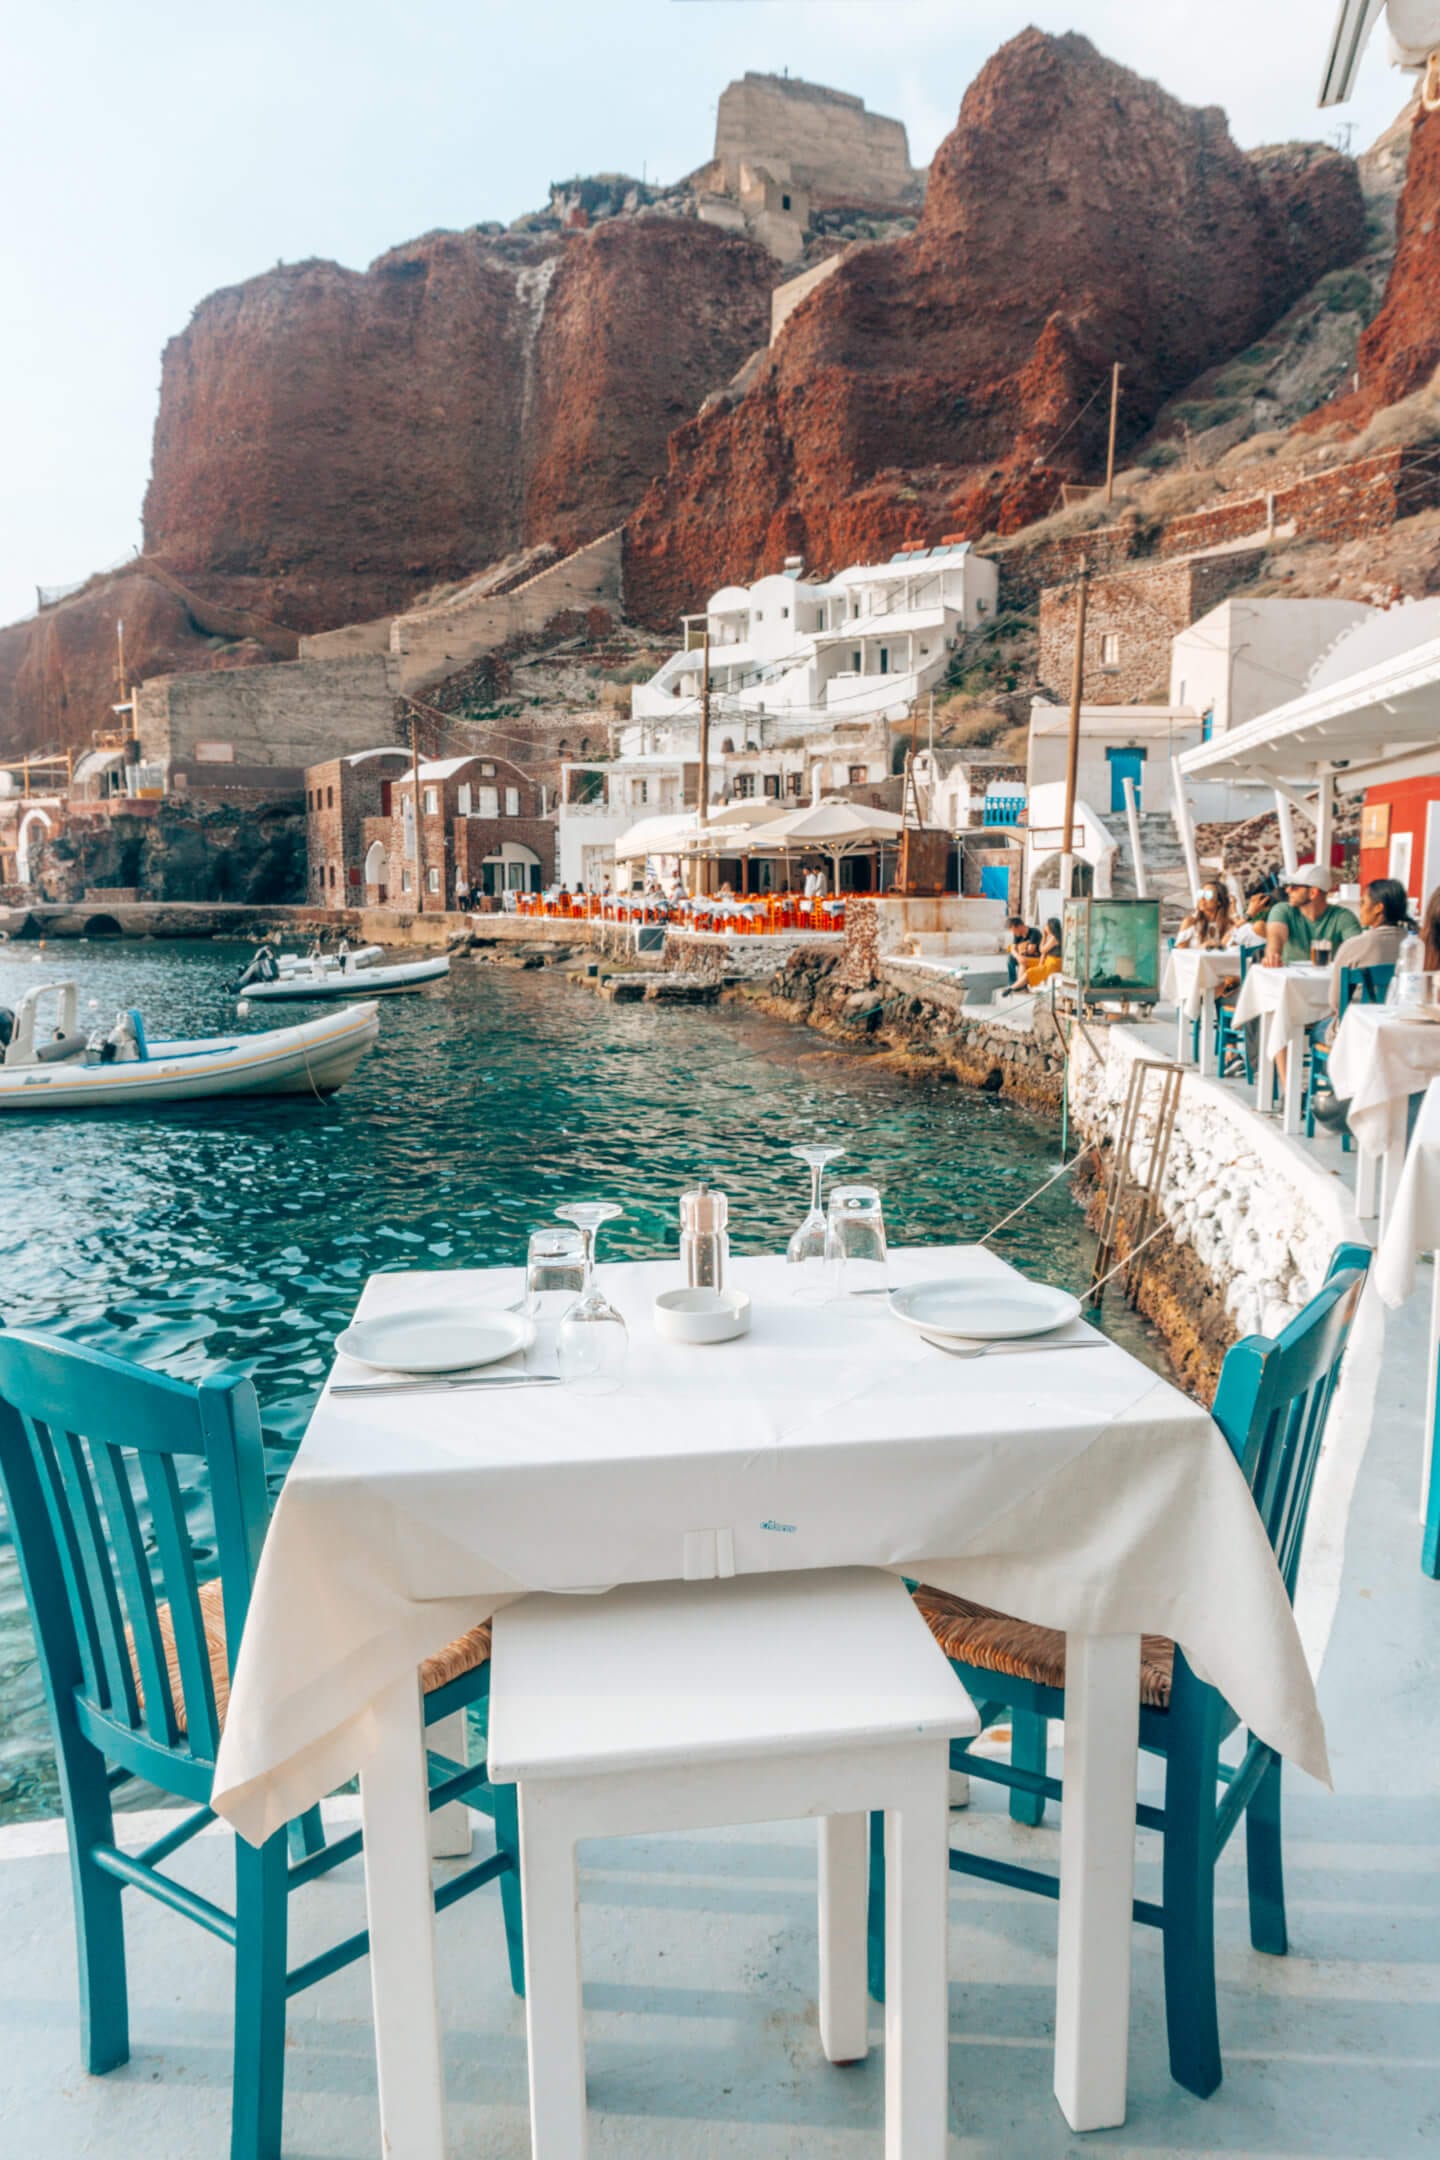 For an unforgettable lunch experience in Santorini, Greece I highly recommend going to Ammoudi Bay and indulging in a meal at the Seafood Tavern. 